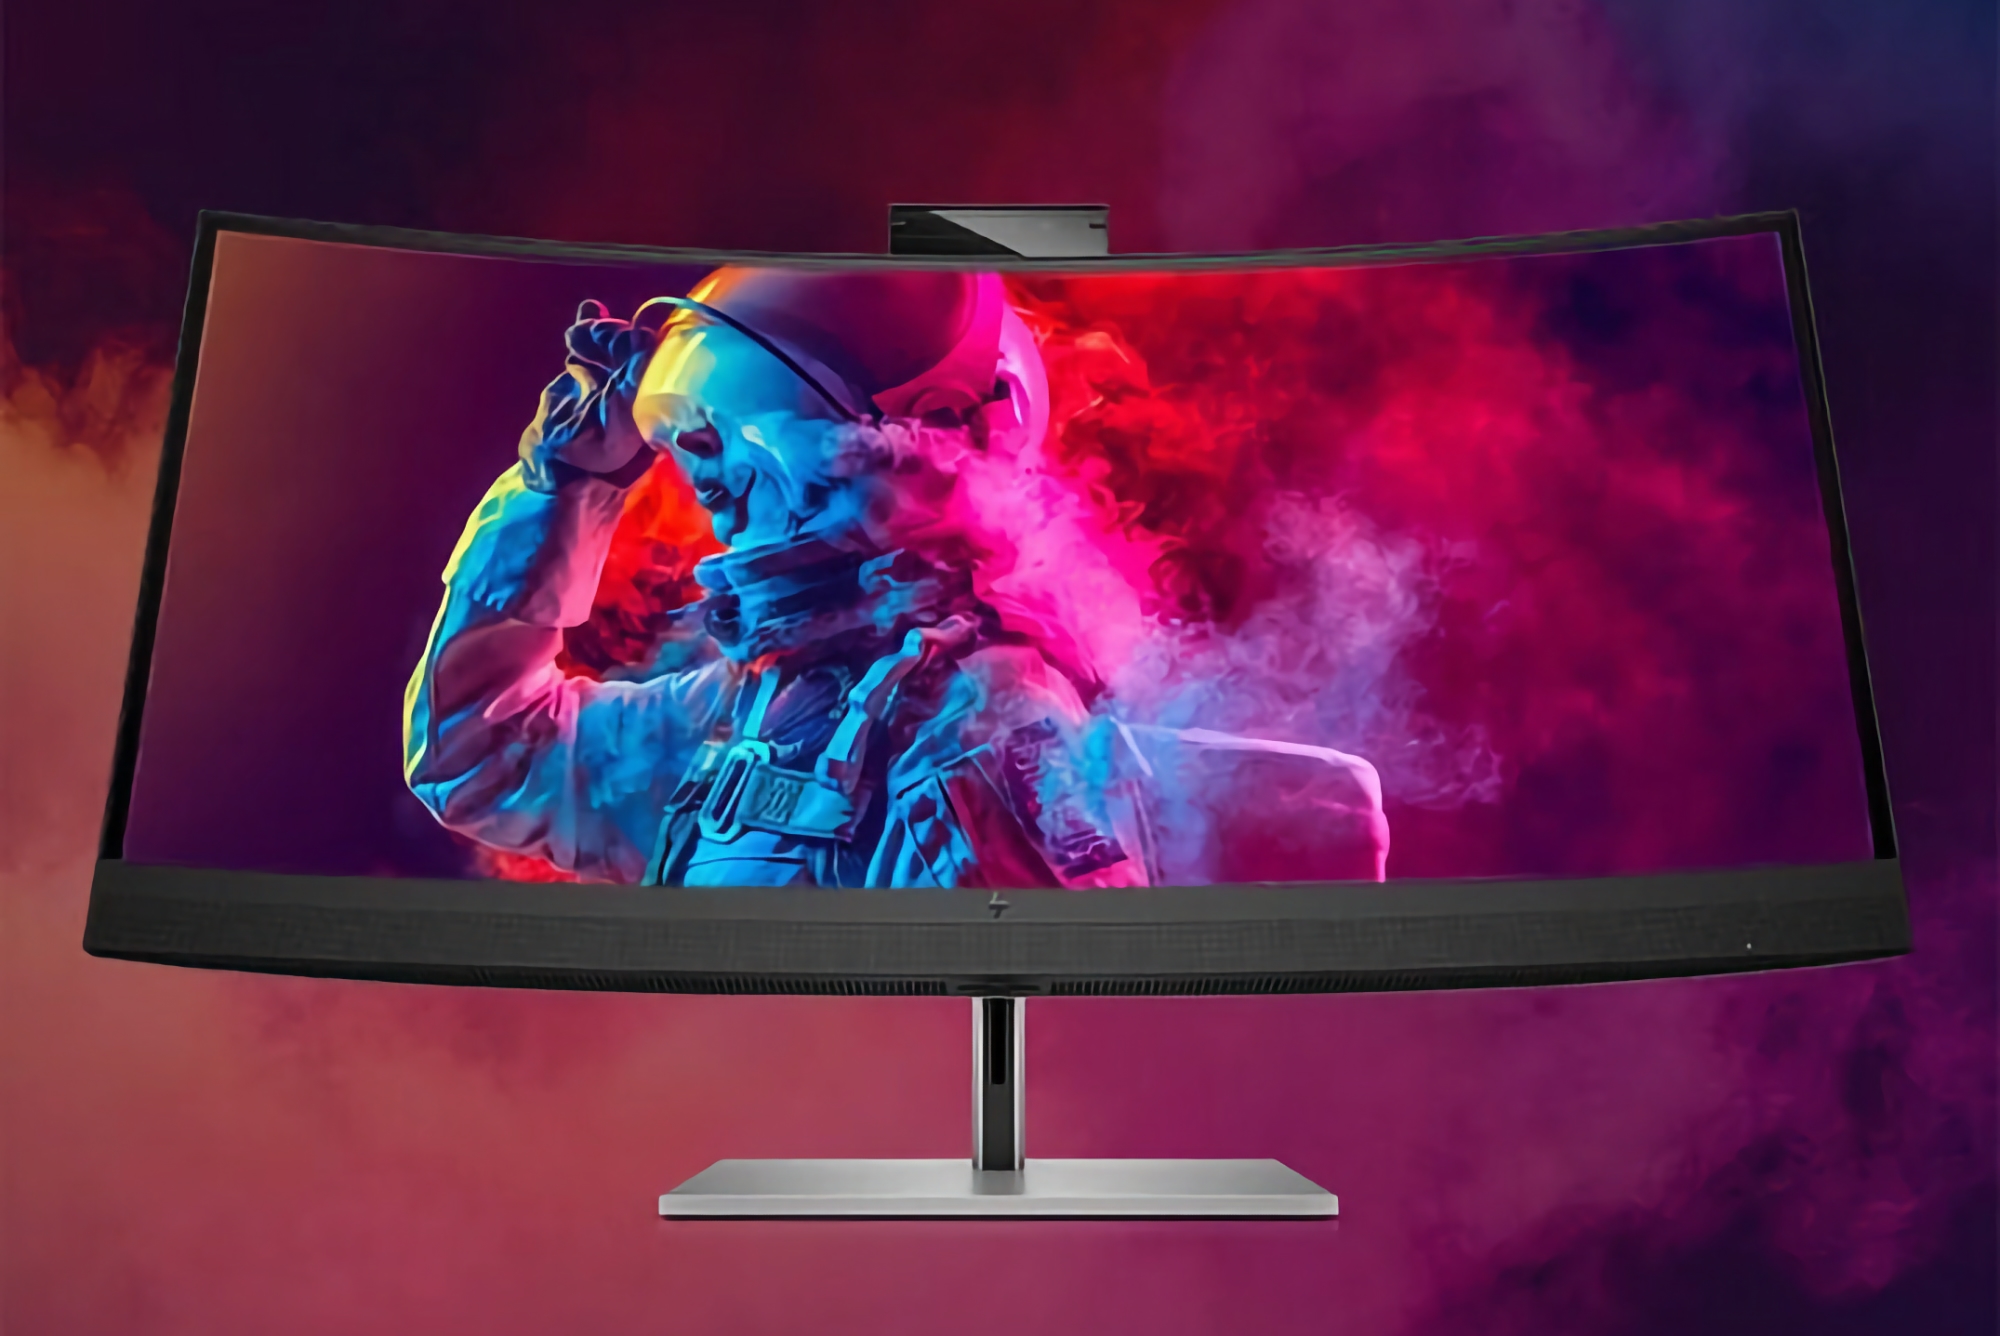 HP has revealed a 34-inch curved monitor with a 5 MP pop-up camera and support for Power Delivery up to 100W